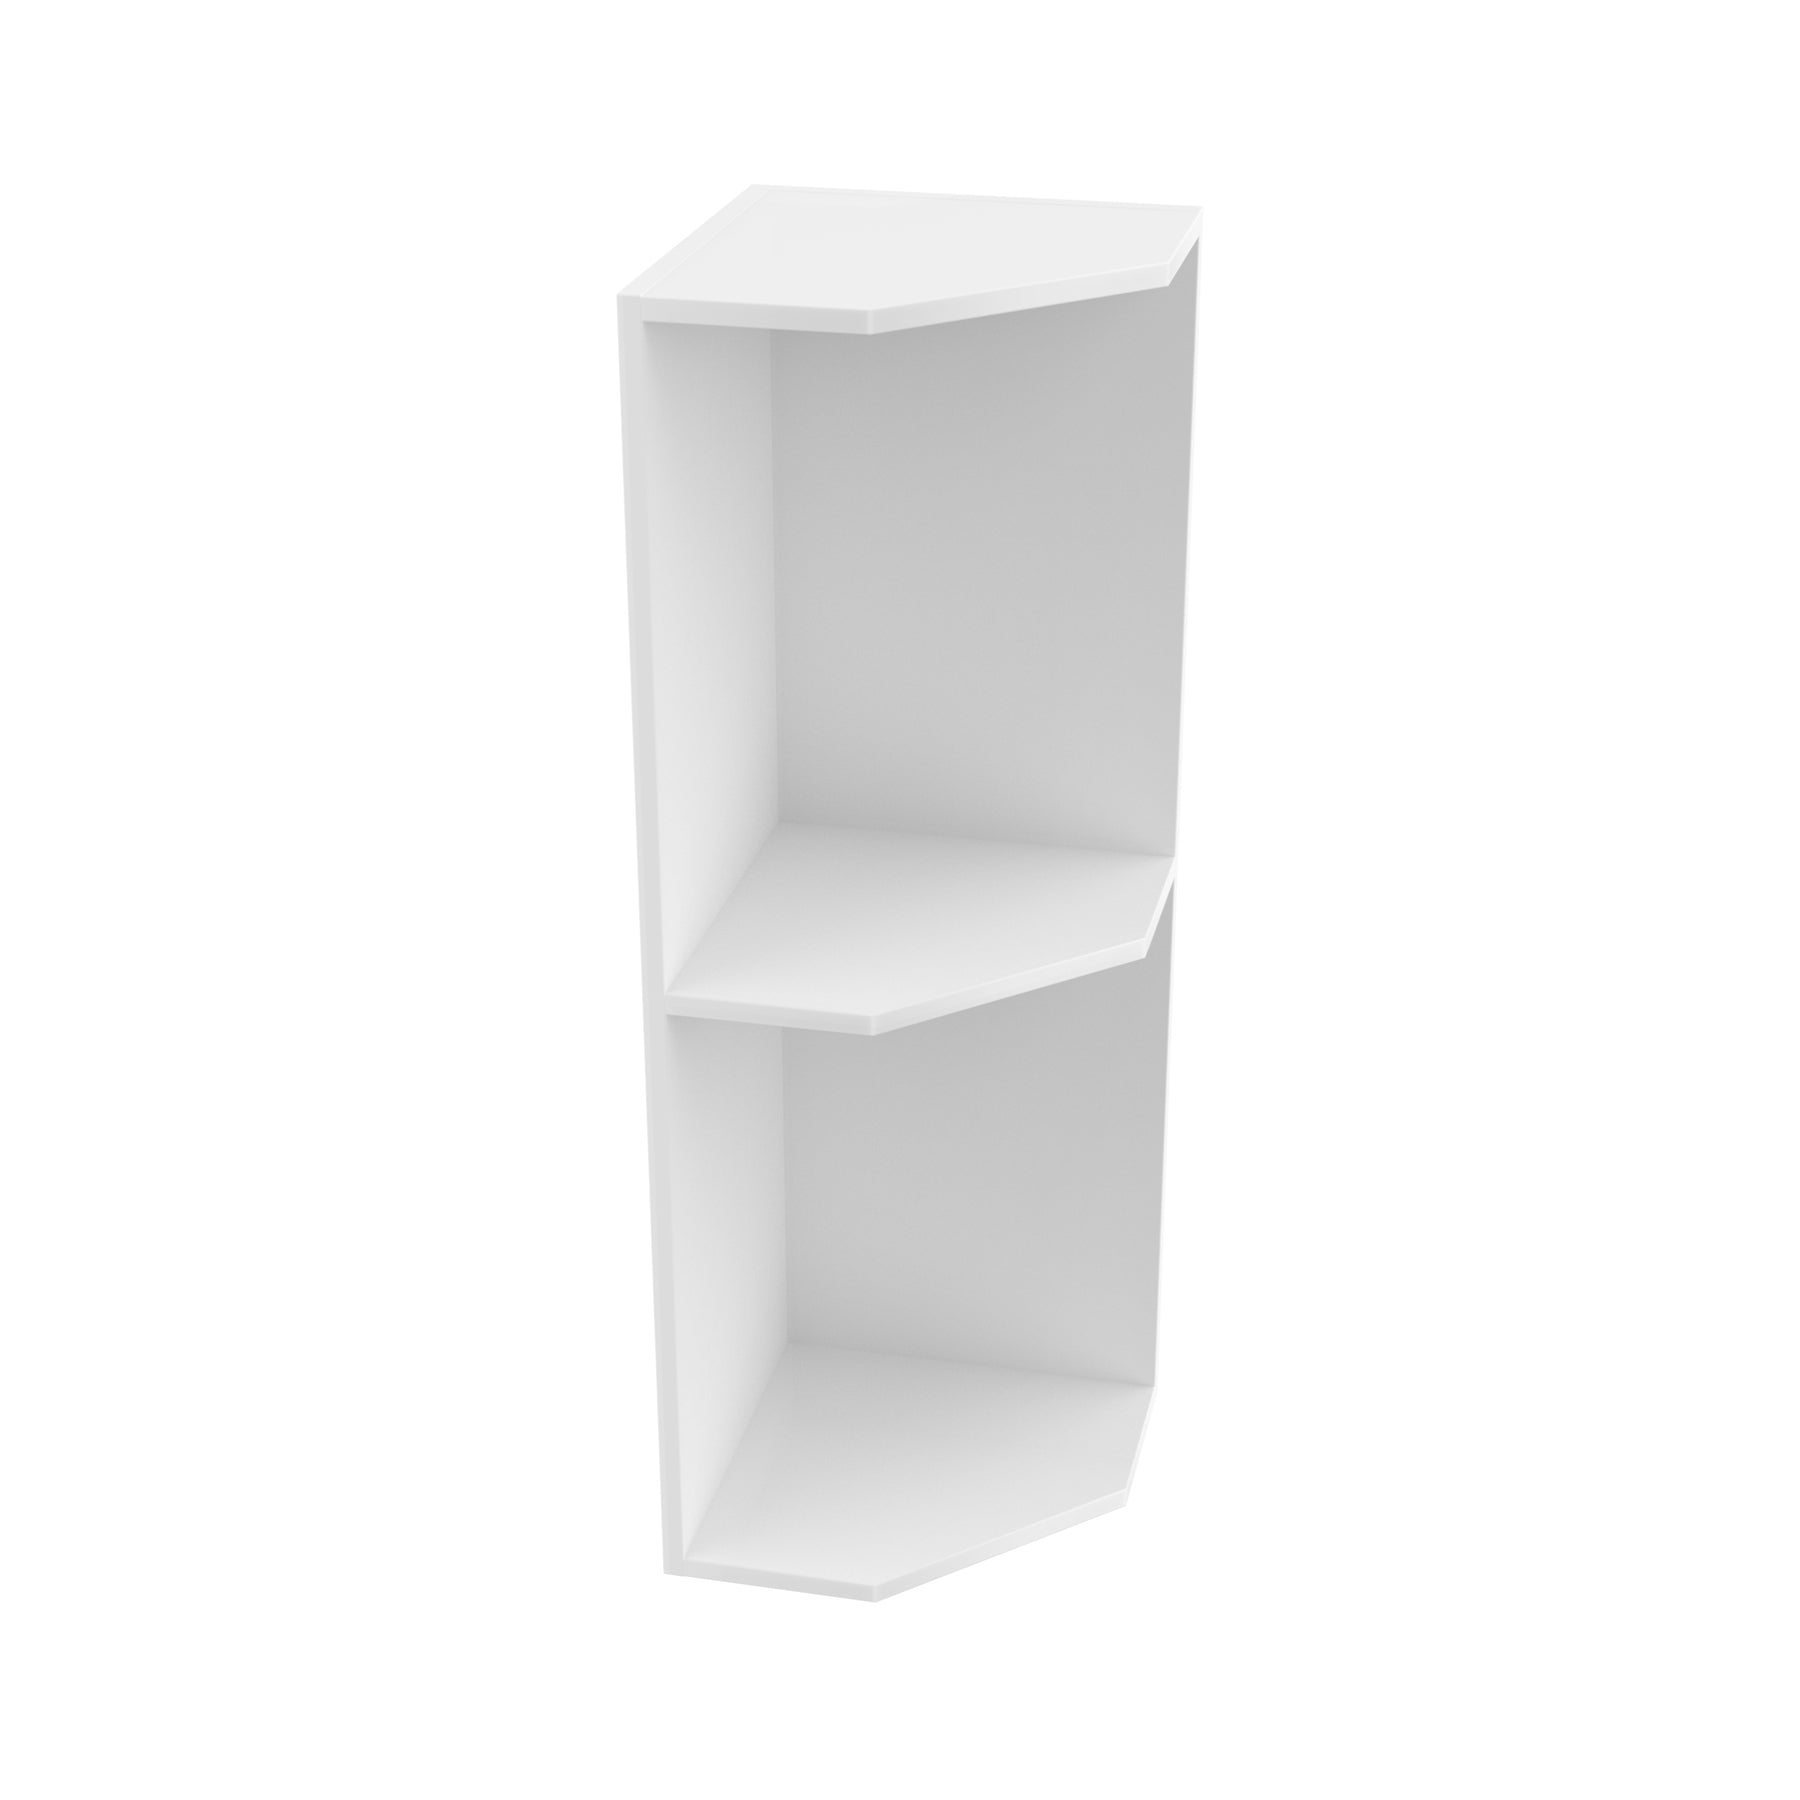 Wall Cabinet - RTA - Lacquer White - End Wall Shelf Cabinet | 12"W x 36"H x 12"D